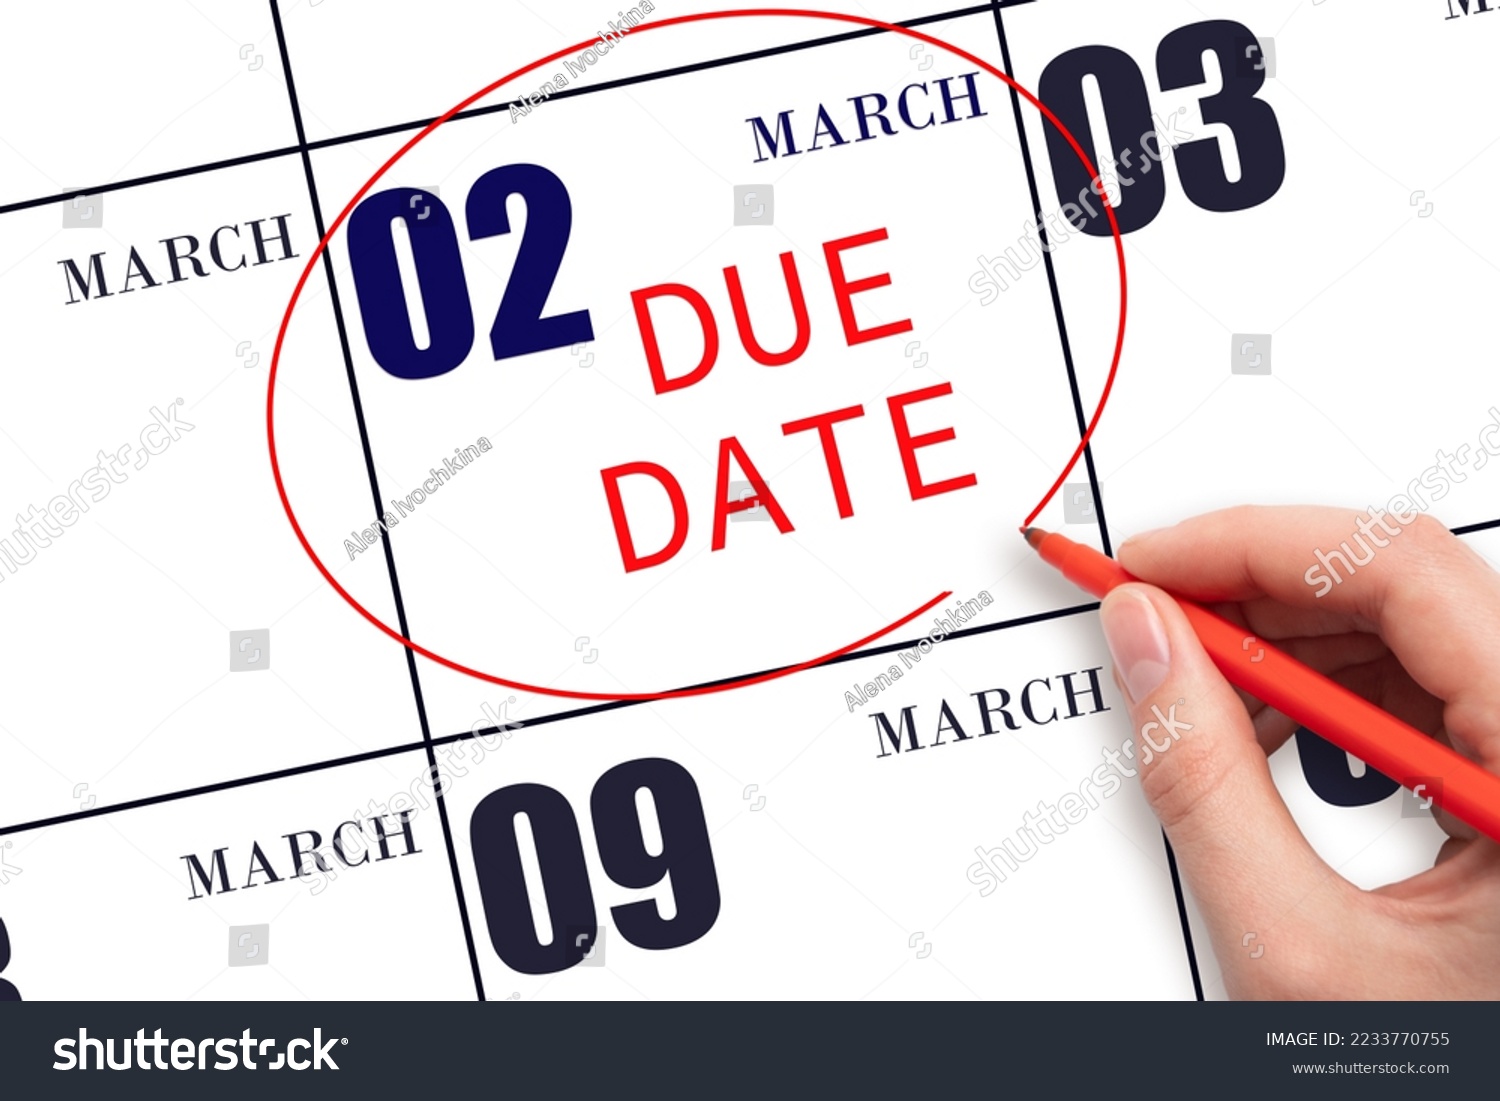 2nd day of March. Hand writing text DUE DATE on calendar date March 2 and circling it. Payment due date. Business concept. Spring month, day of the year concept. #2233770755